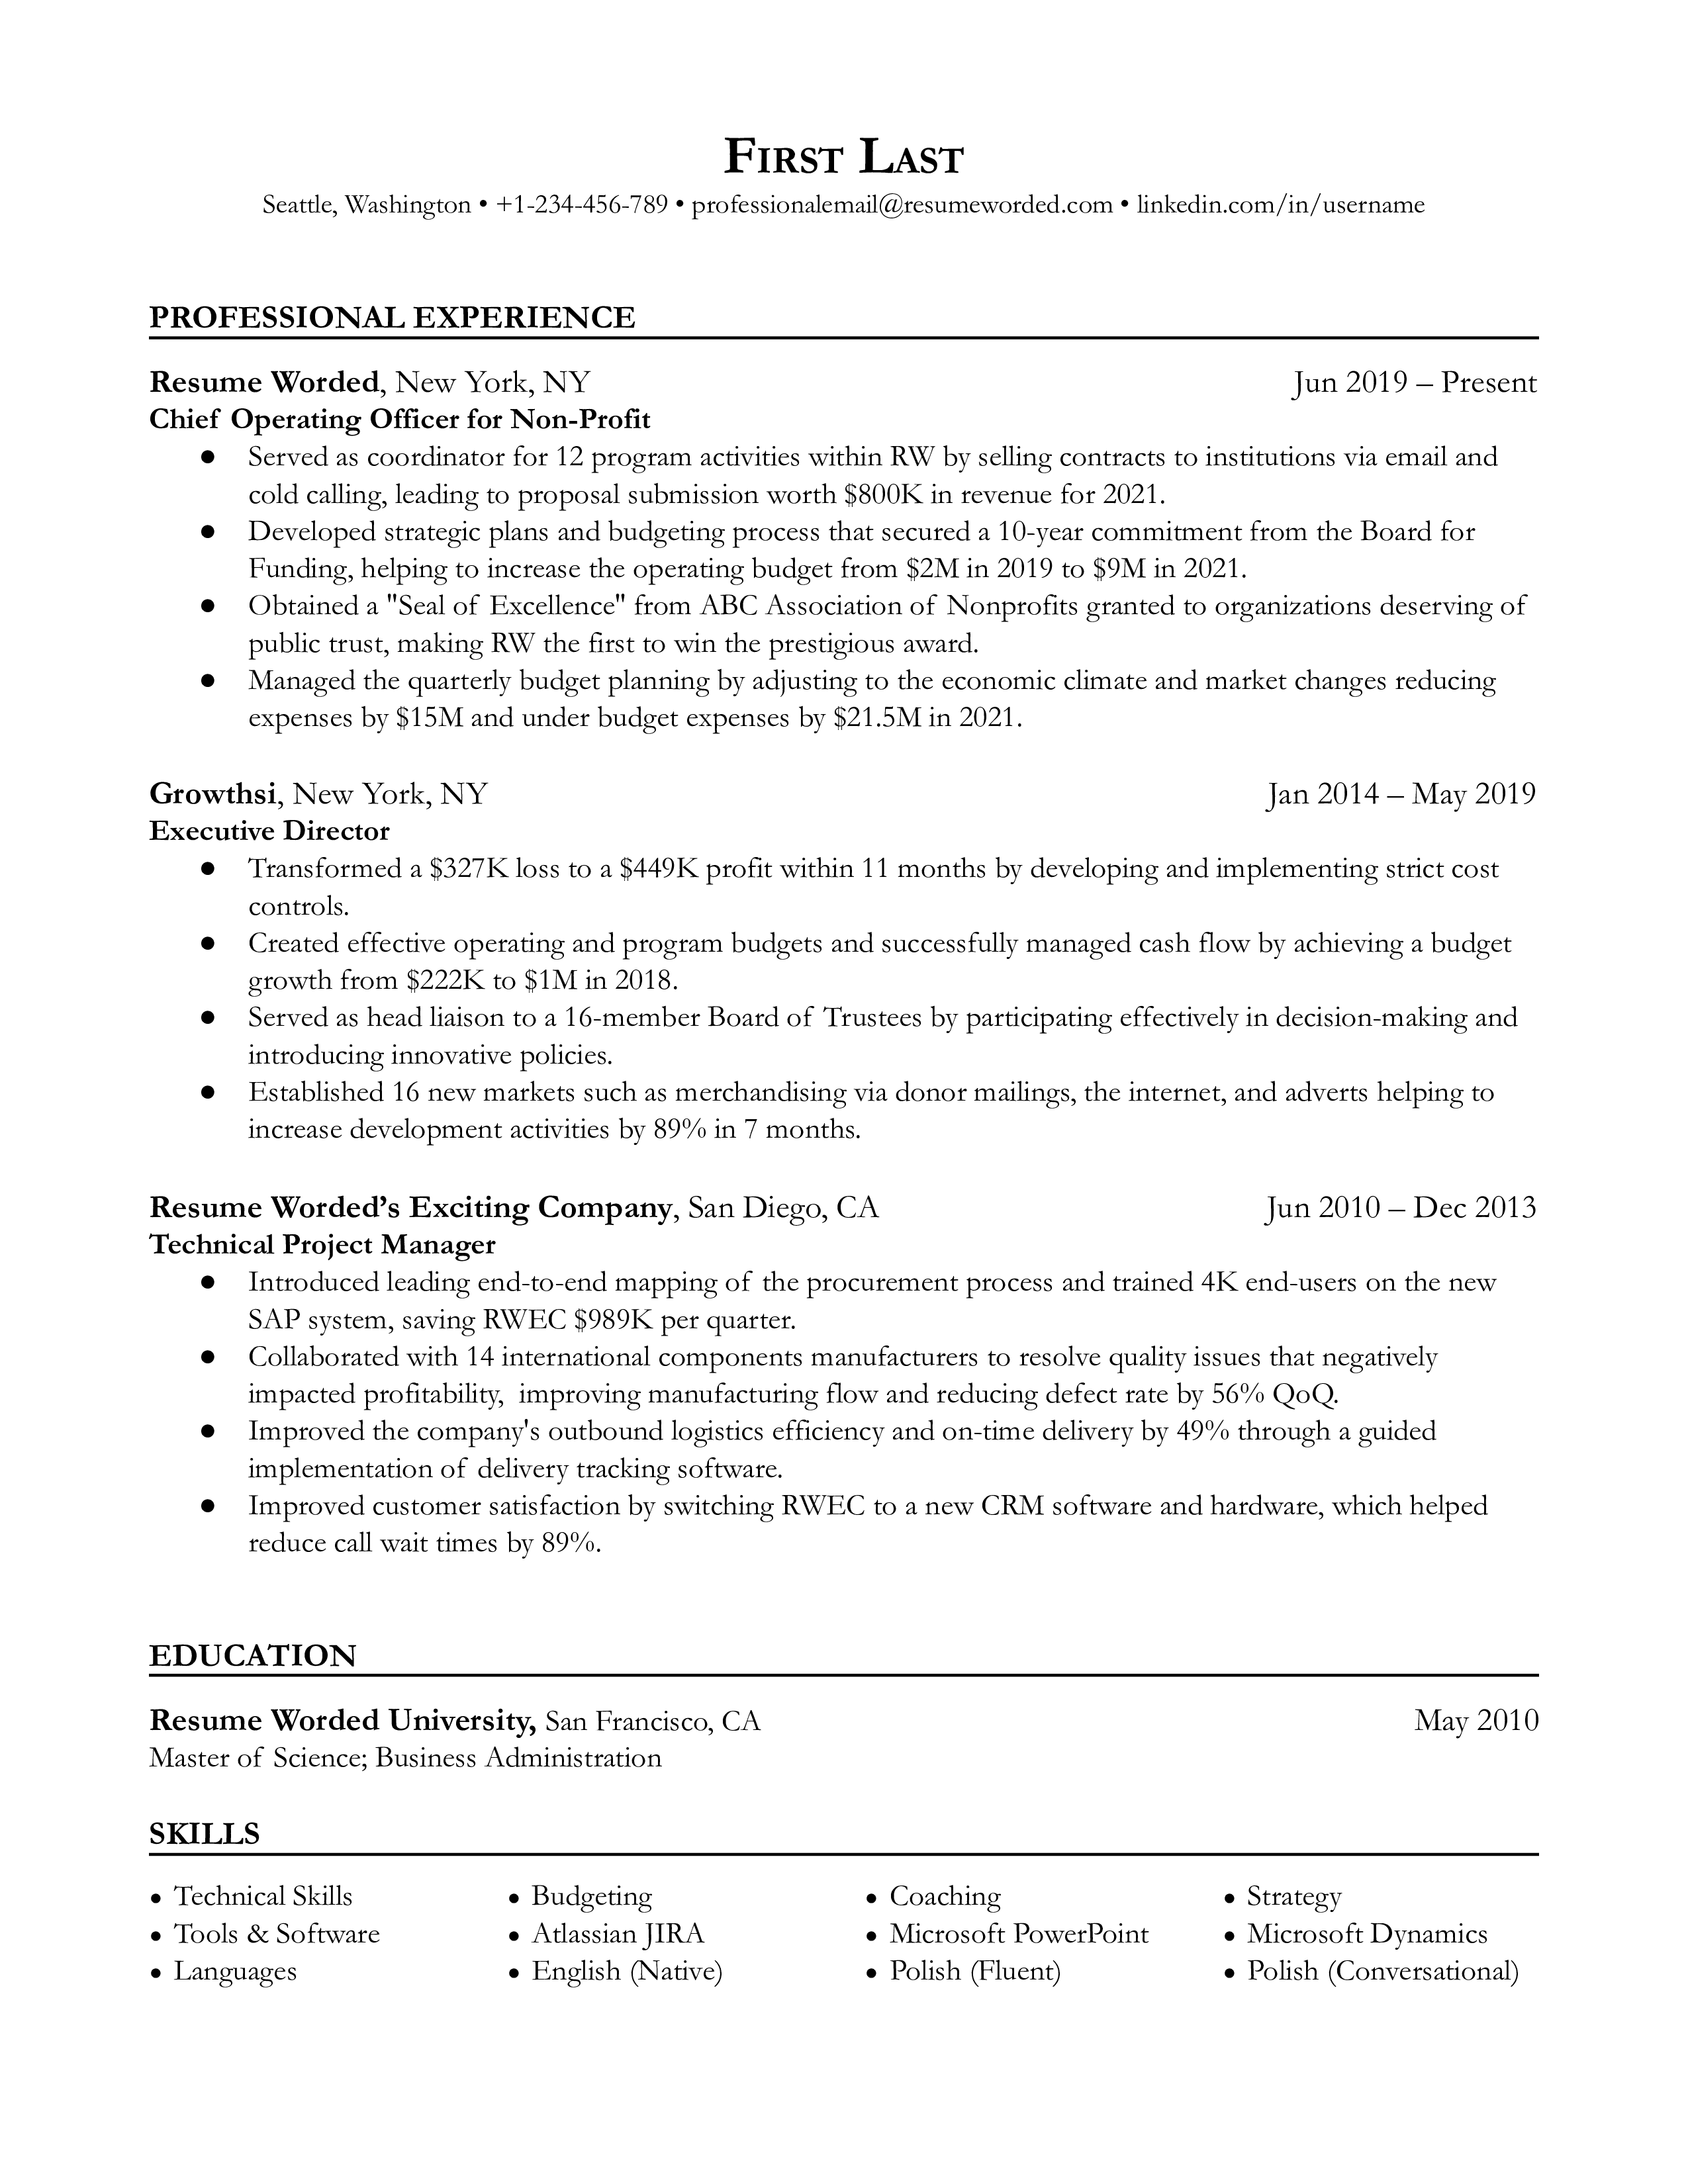 Chief Operating Officer for Non-Profit Resume Sample